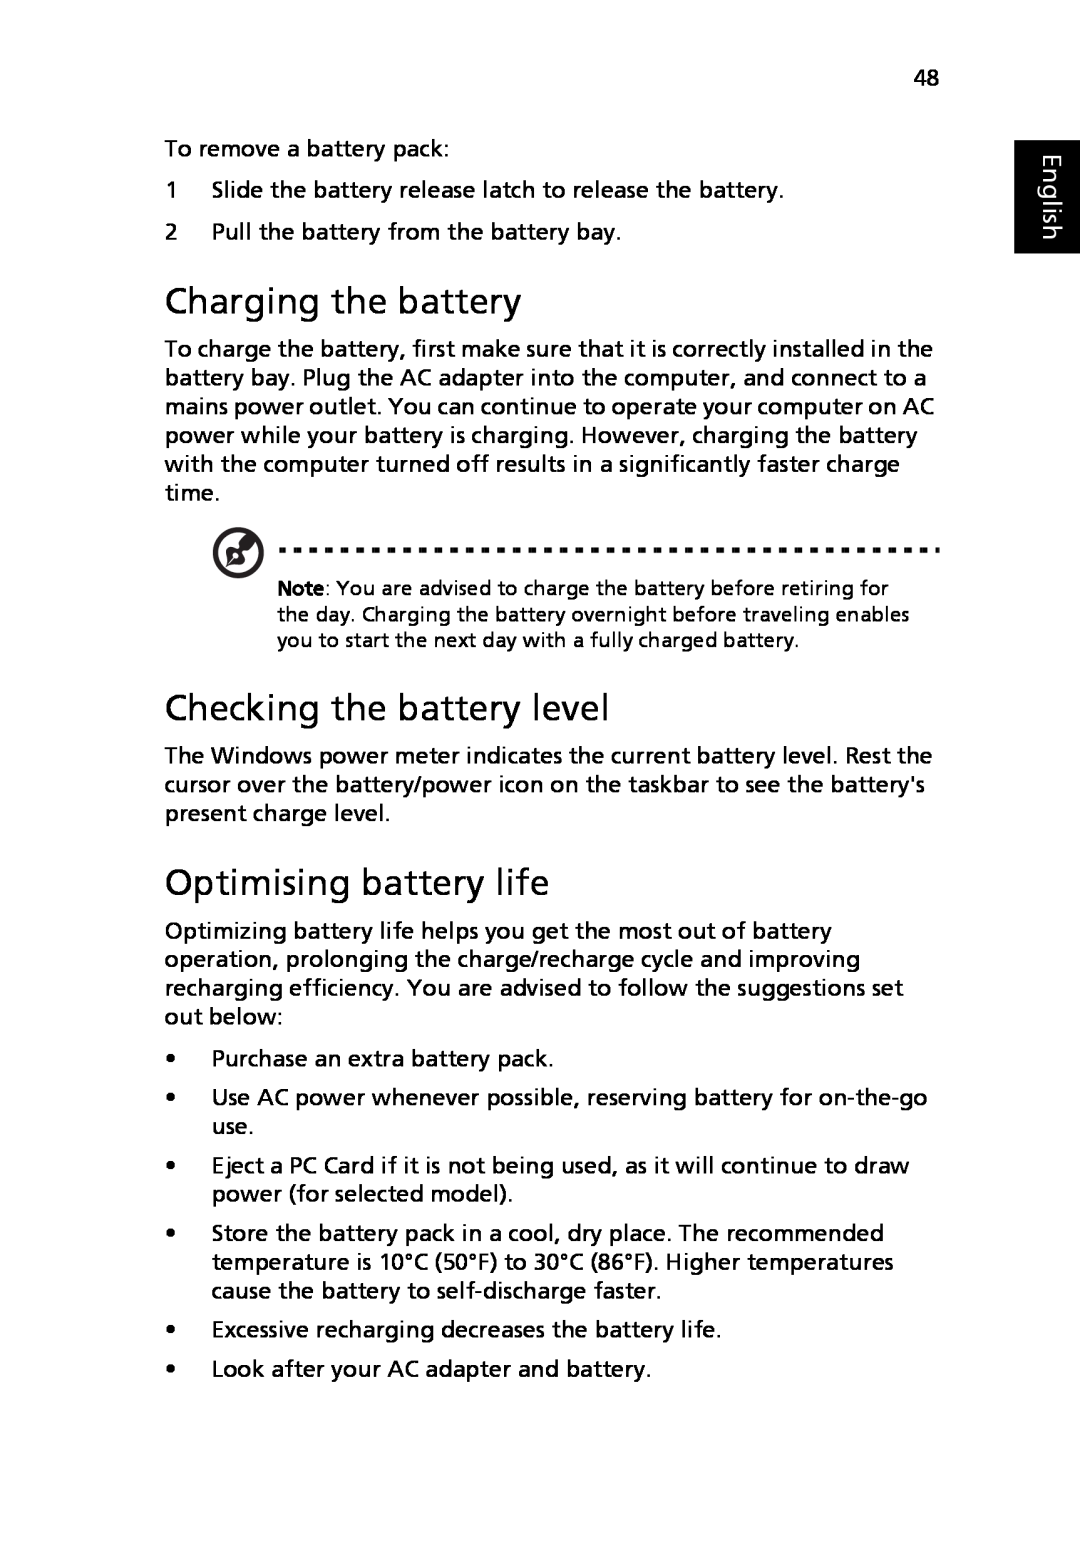 Acer LE1, 8920 Series manual Charging the battery, Checking the battery level, Optimising battery life, English 